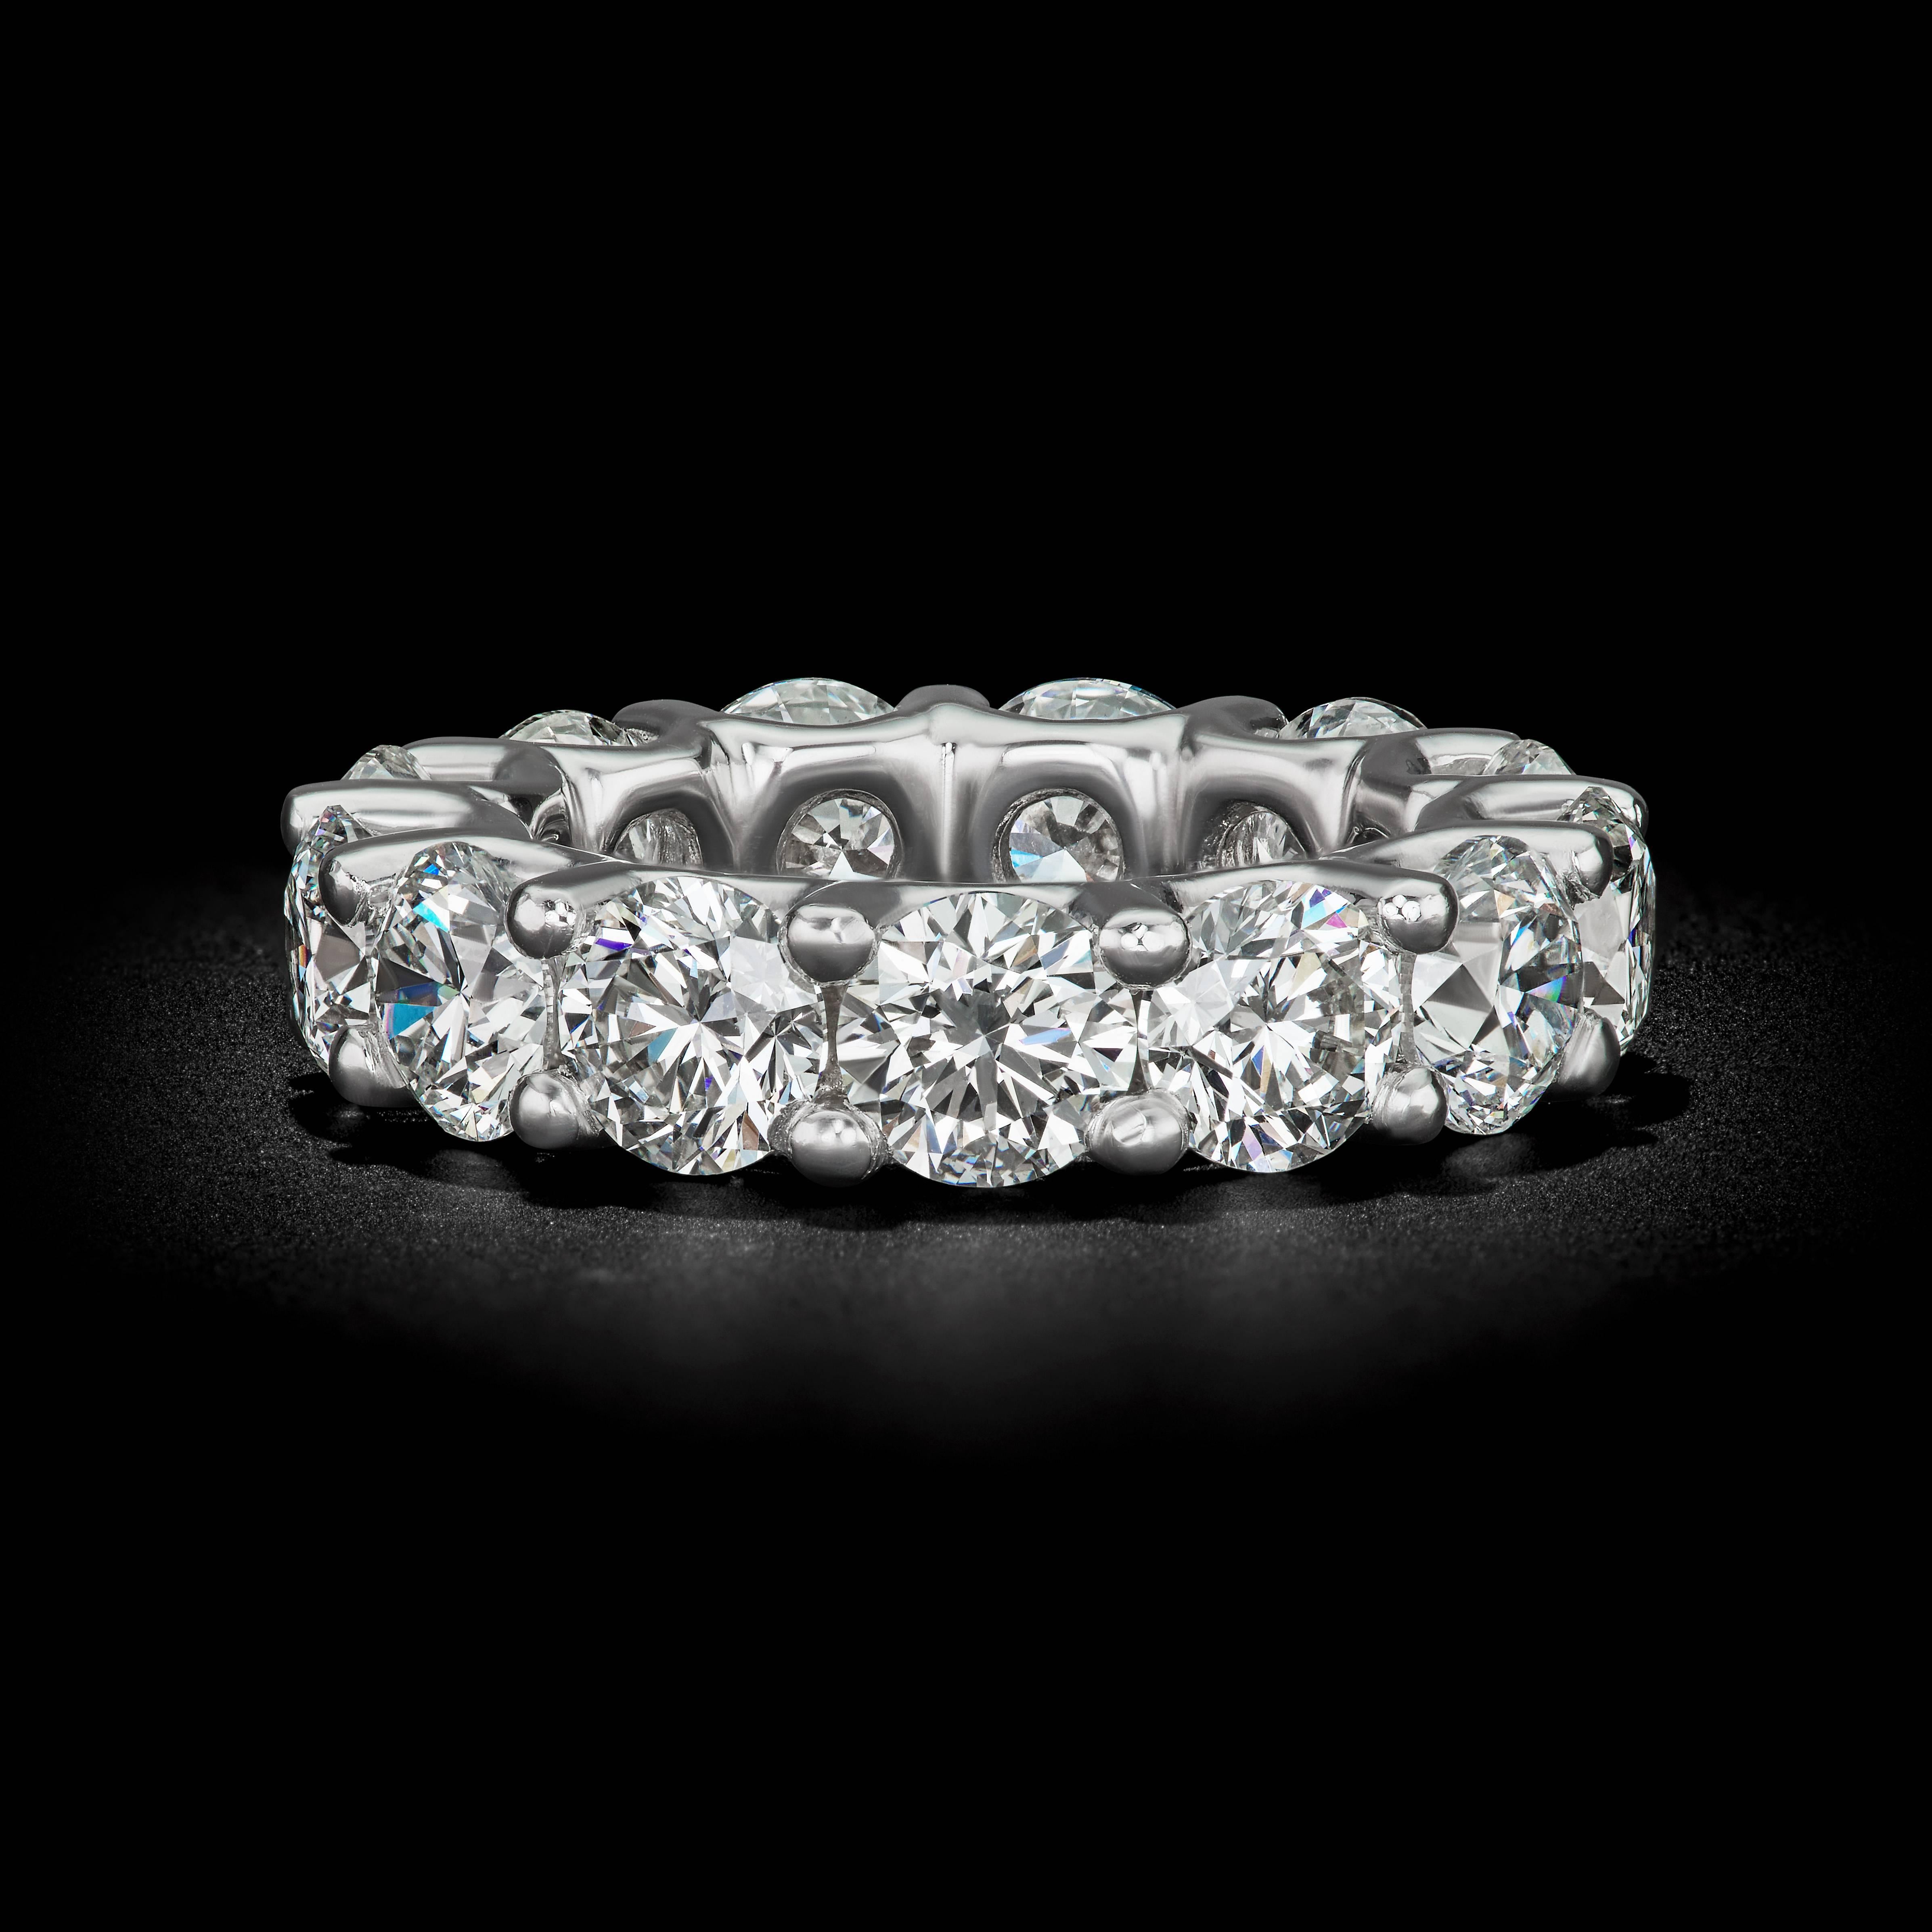 This stunning handmade Platinum eternity band has 13 round stones totaling 9.75 cts. with a color ranging from G-H-I and having a clarity of SI1-2 

David Rosenberg is President of the Diamond Bourse of the Southeastern United States and is a